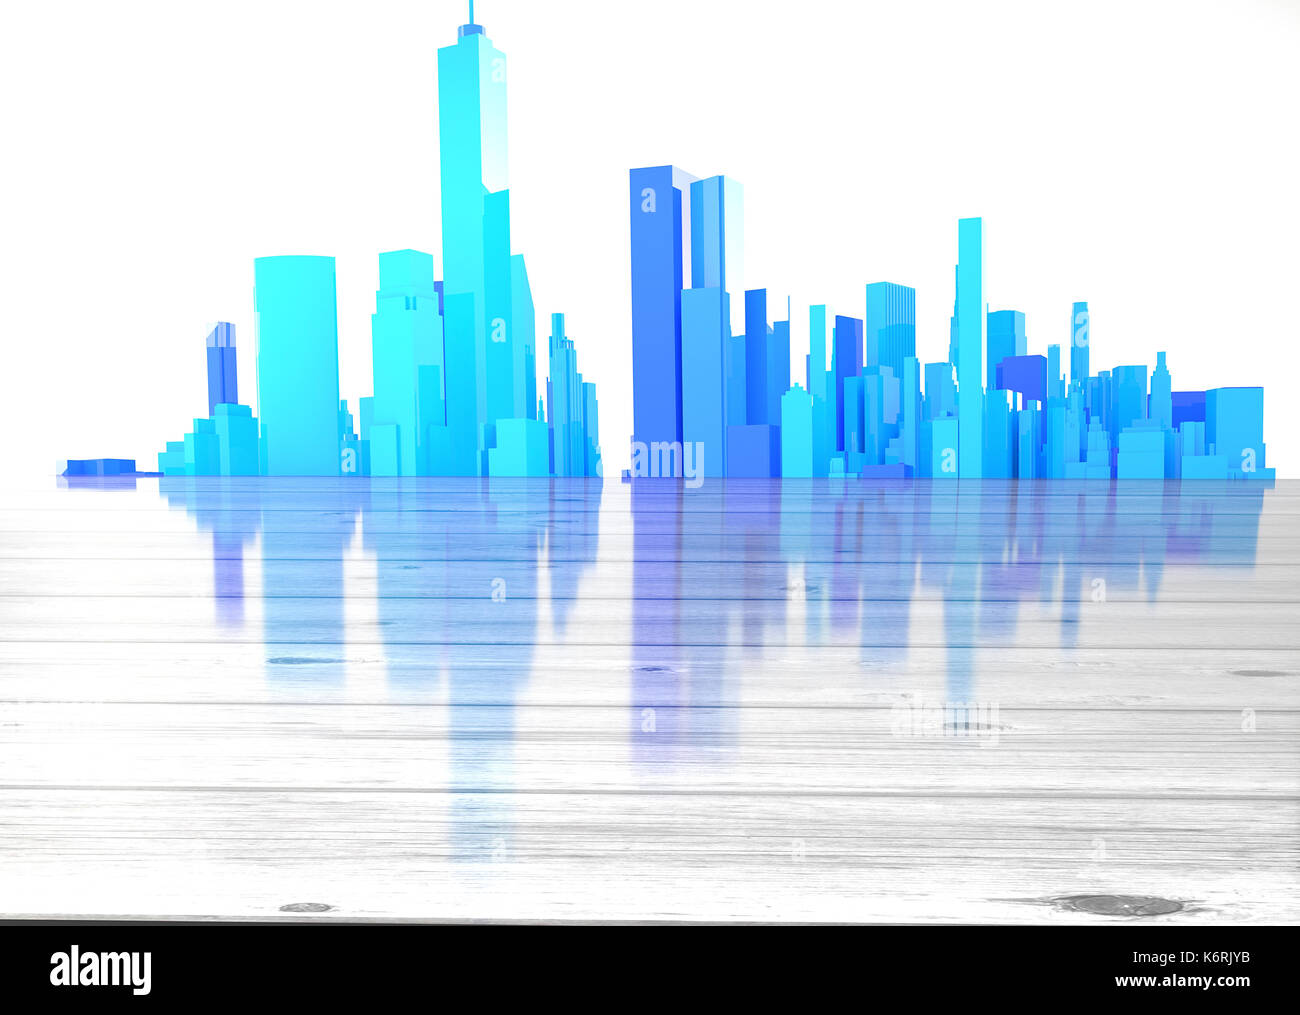 Blue city skyline with shiny wooden foreground Stock Photo